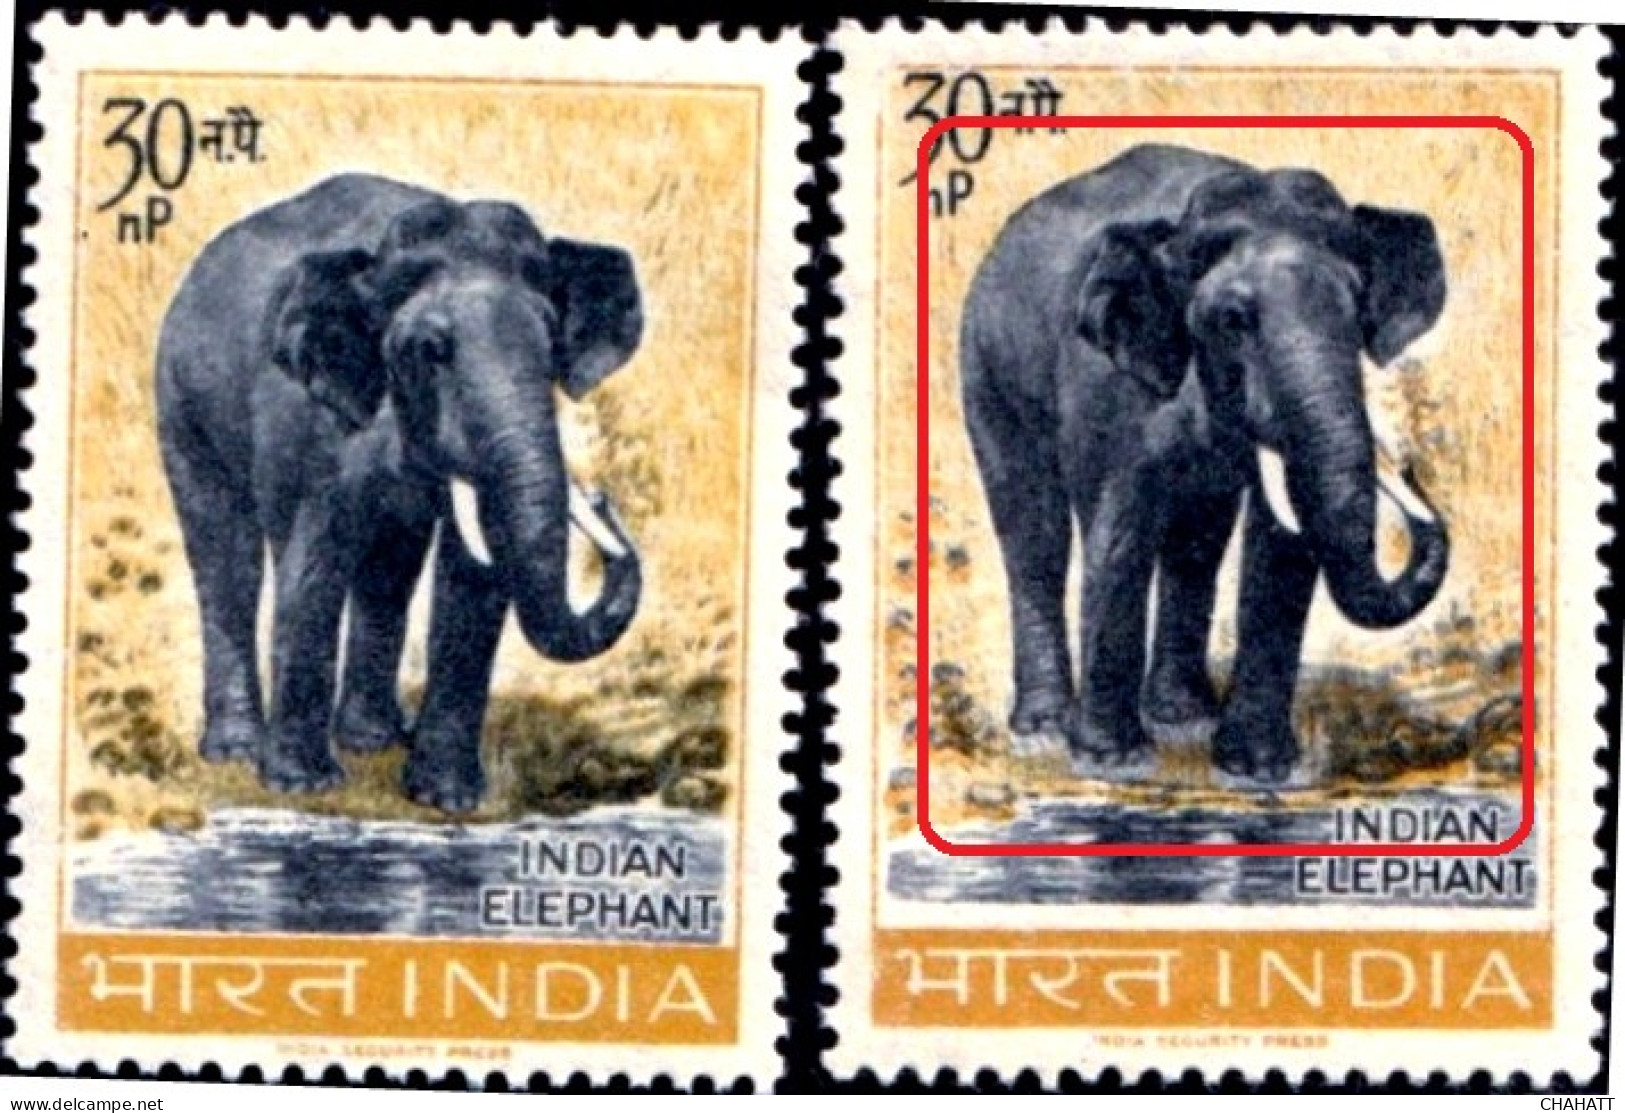 INDIAN ELEPHANT- 30np-WATERMARKED- INDIA 1963- COLOR VARIETY -MNH-IE-92 - Plaatfouten En Curiosa